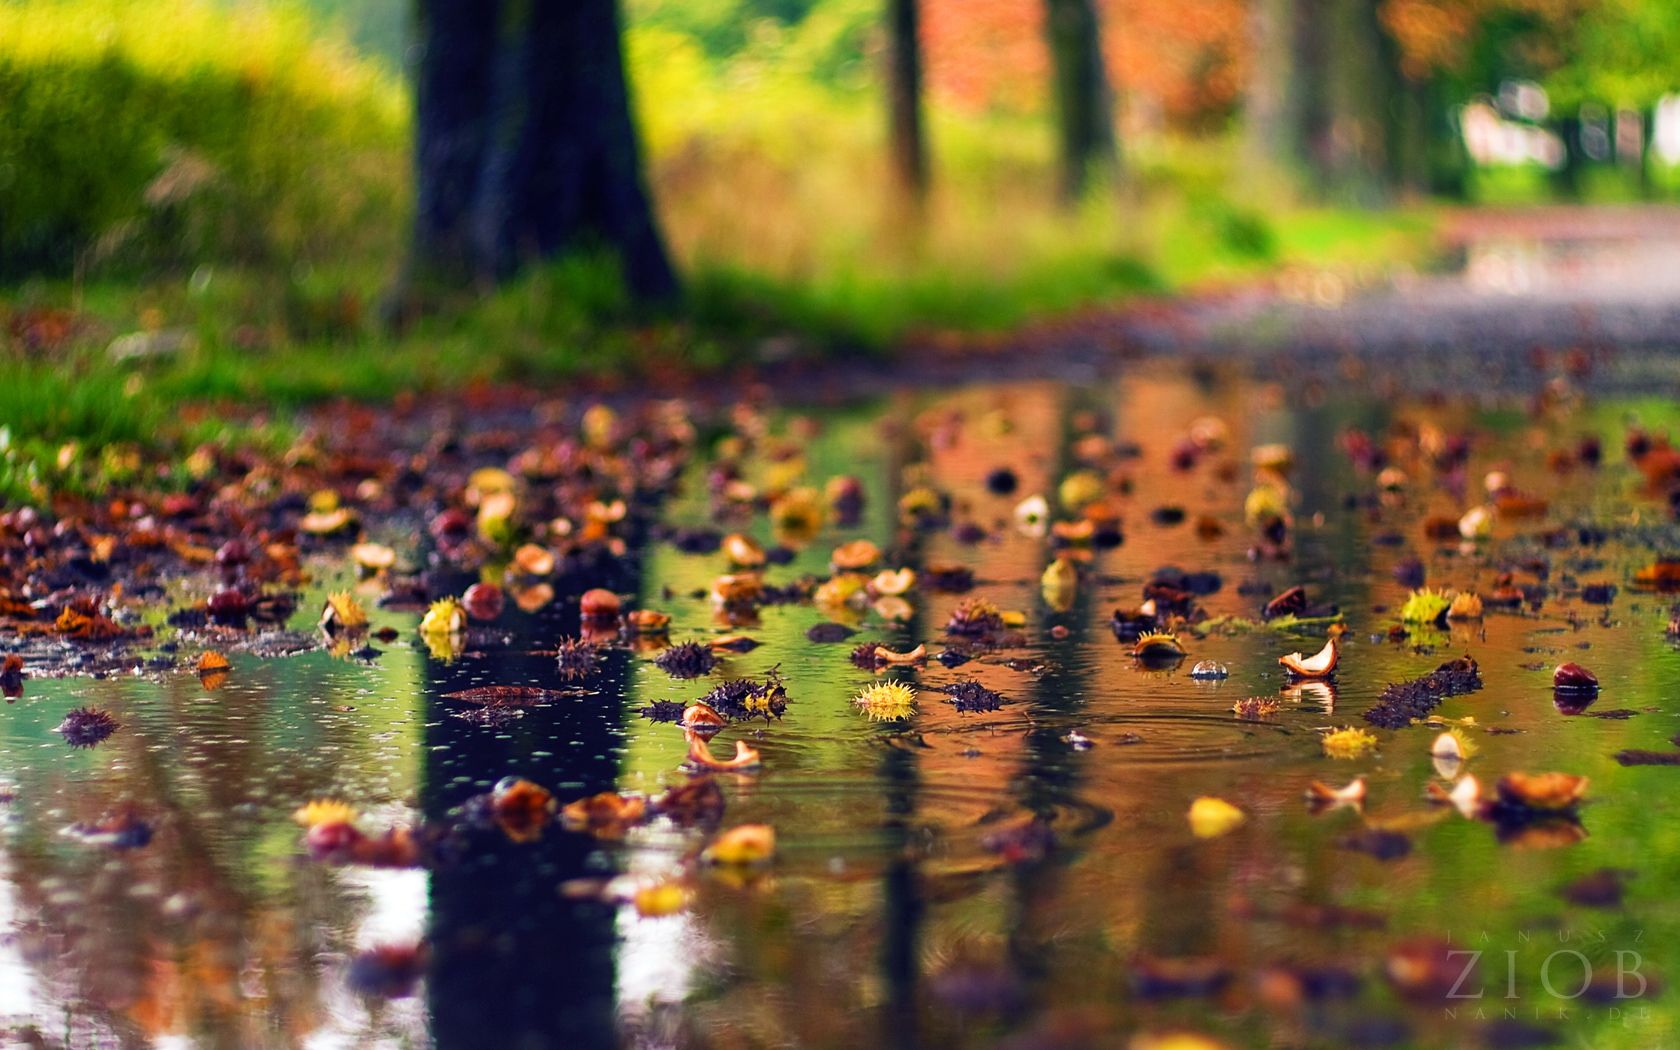 rainy day wallpaper hd,nature,leaf,natural landscape,water,tree